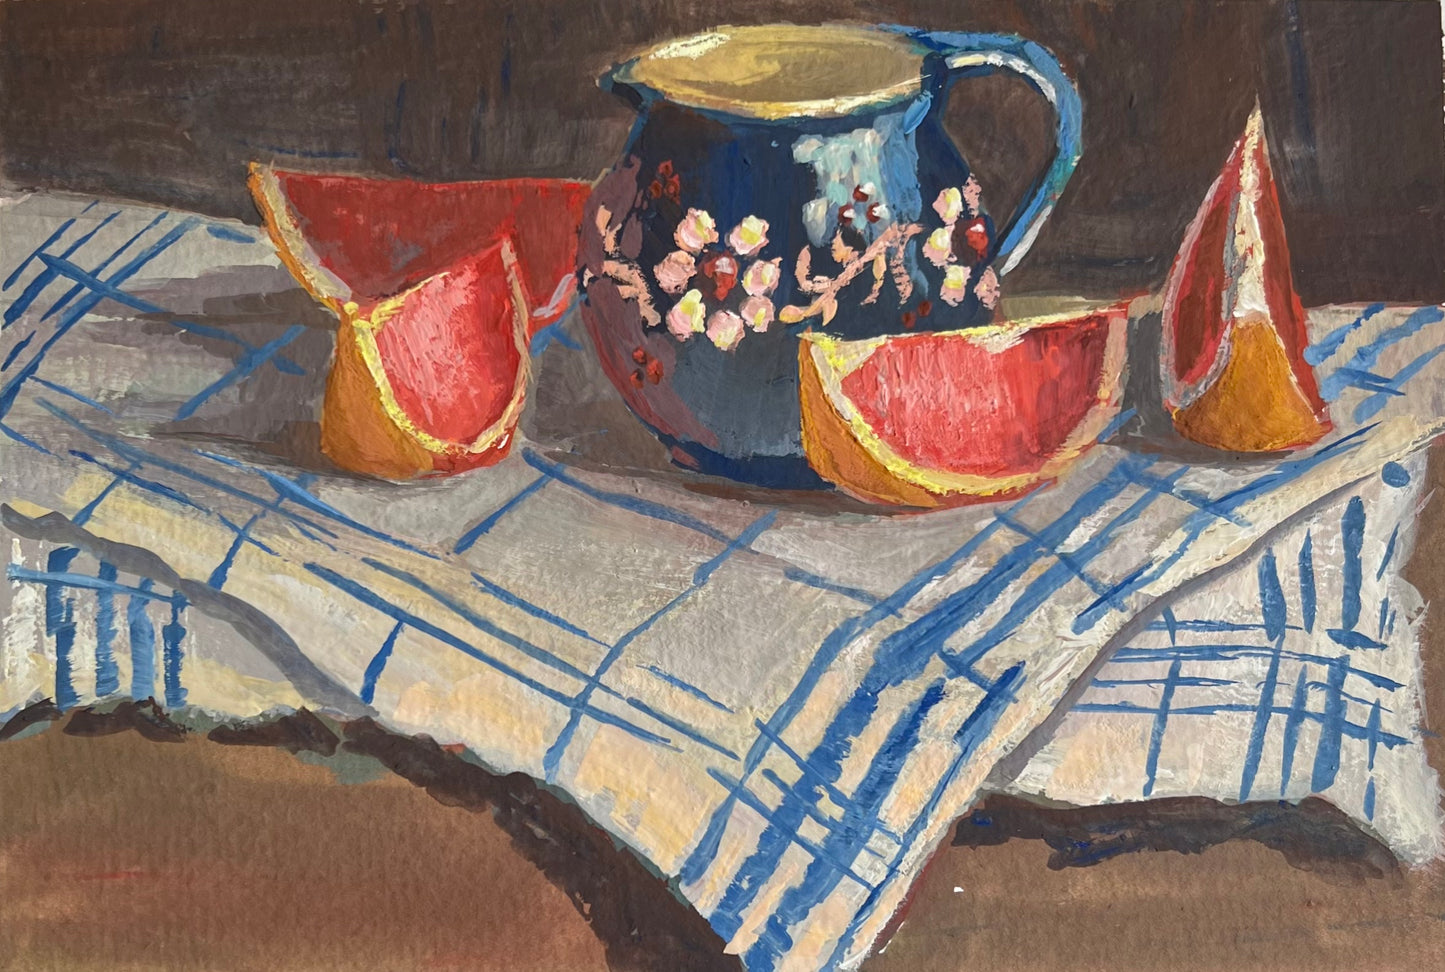 Gouache Painting - Grapefruit Slices with a ceramic jug